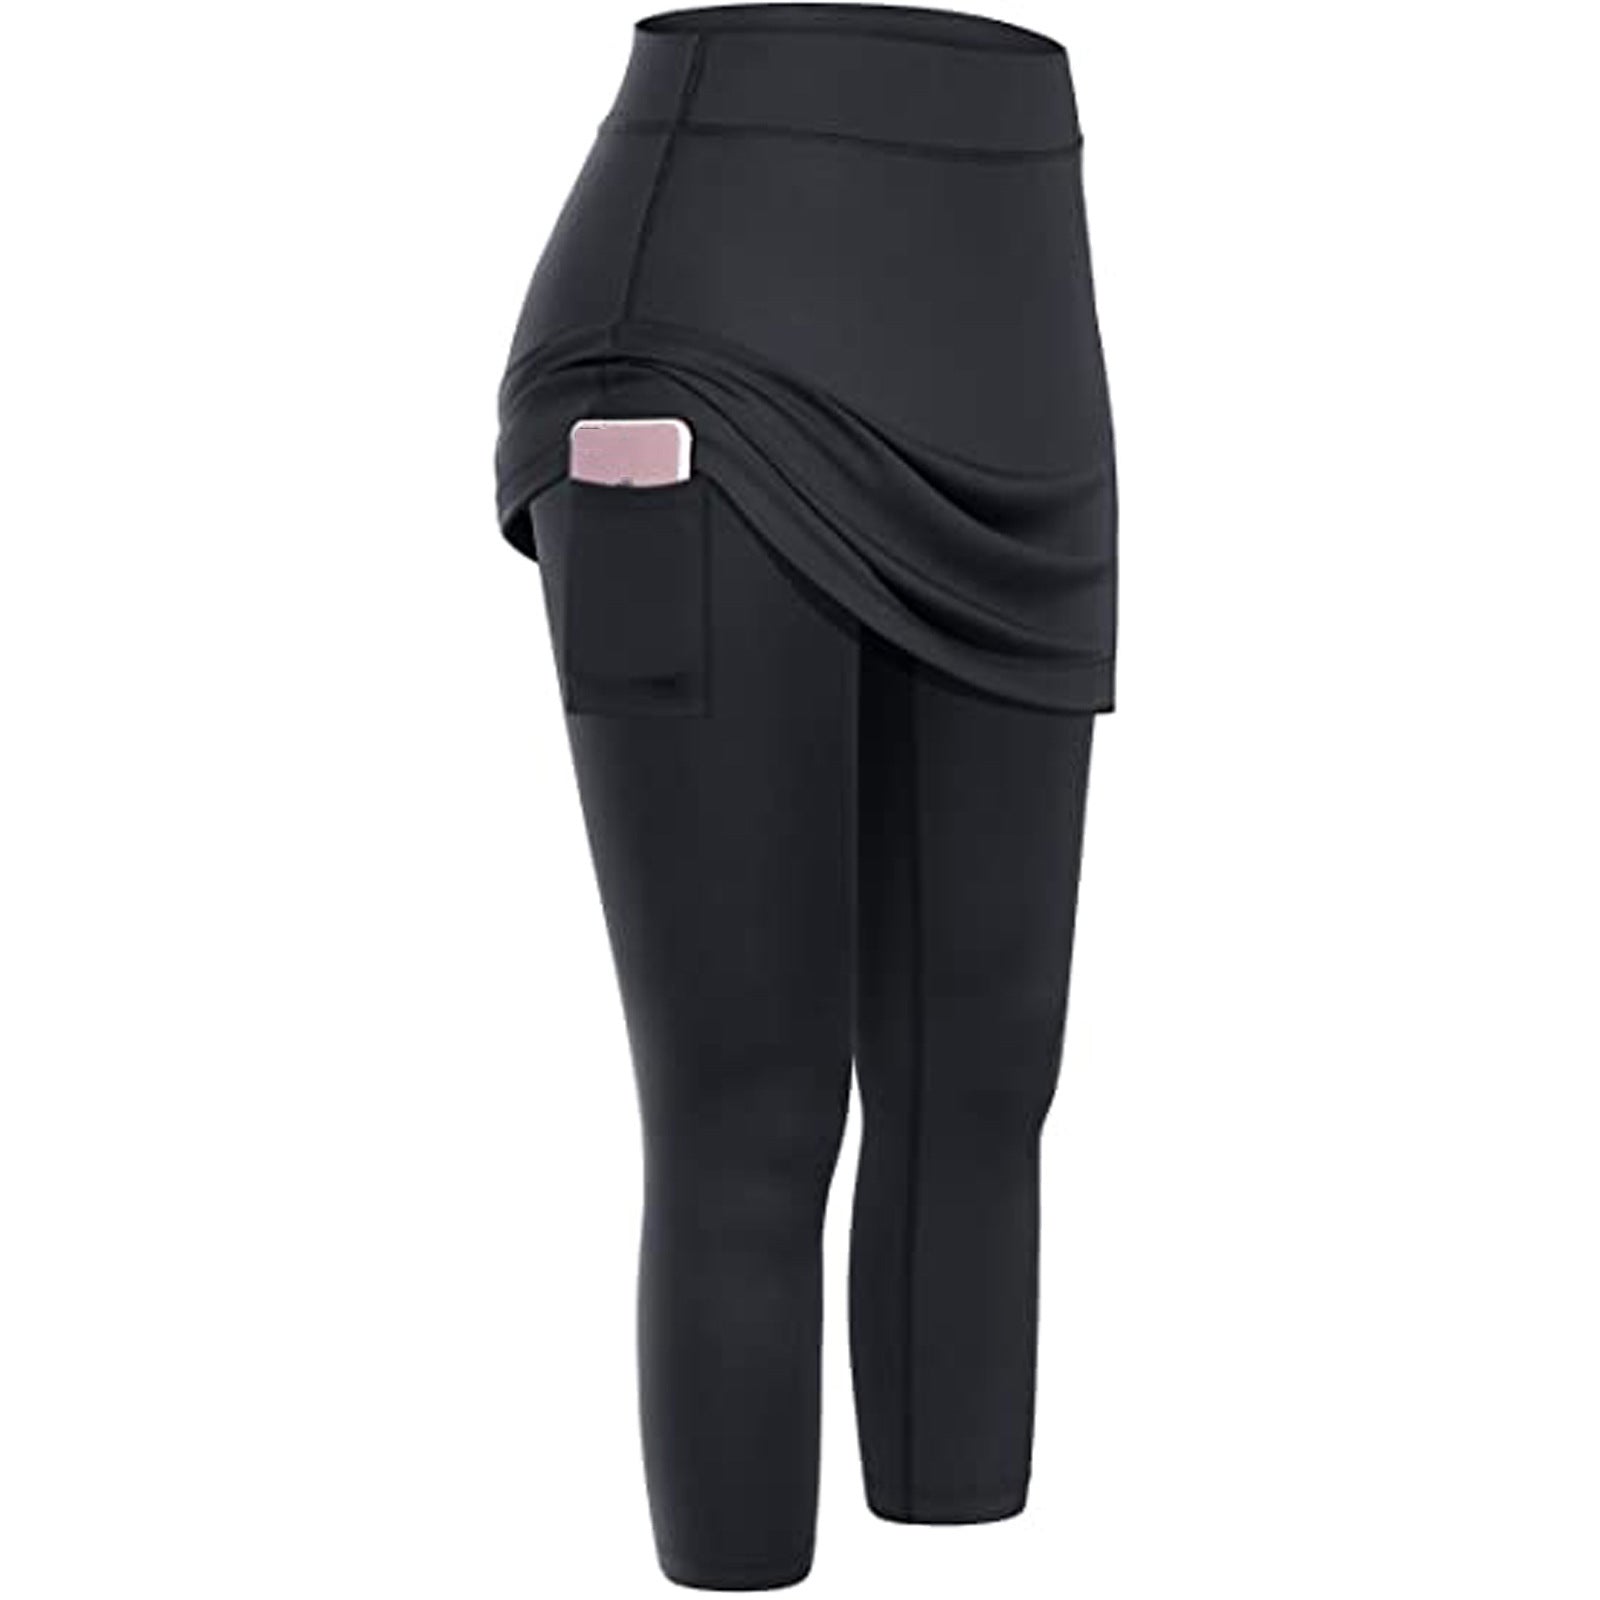 Sports Fitness Women Leggings With Pockets